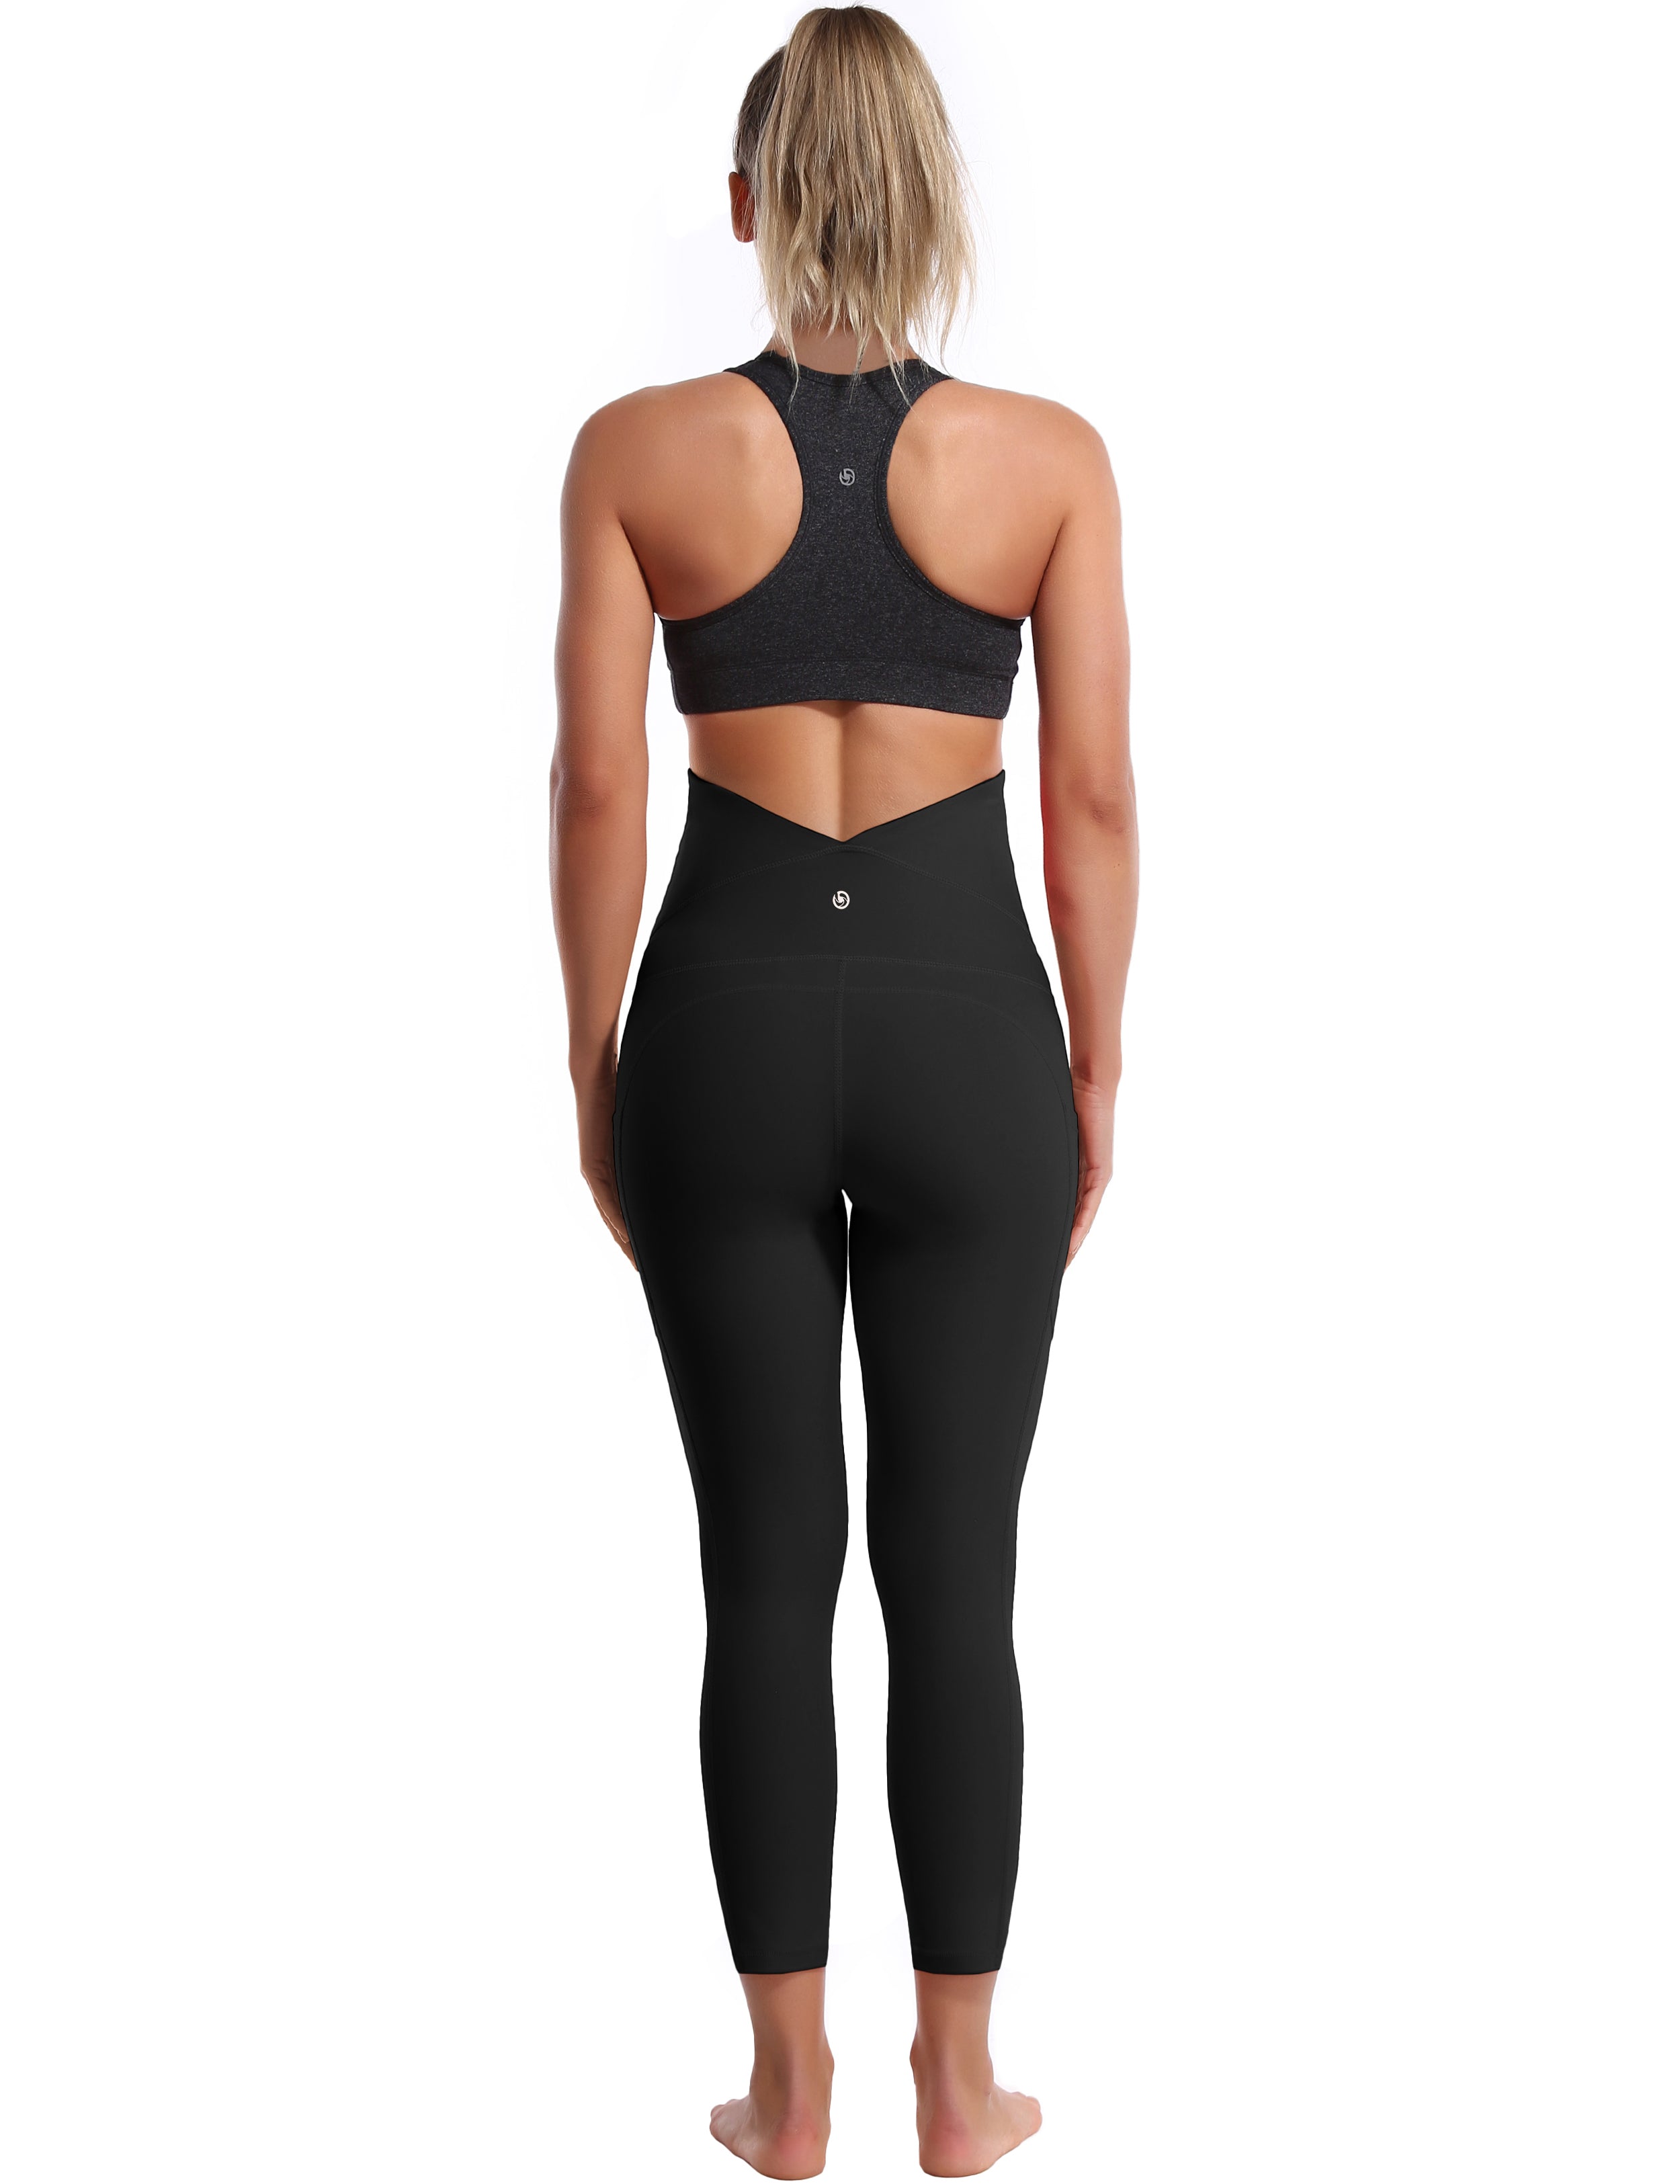 22" Side Pockets Maternity Pilates Pants black 87%Nylon/13%Spandex Softest-ever fabric High elasticity 4-way stretch Fabric doesn't attract lint easily No see-through Moisture-wicking Machine wash